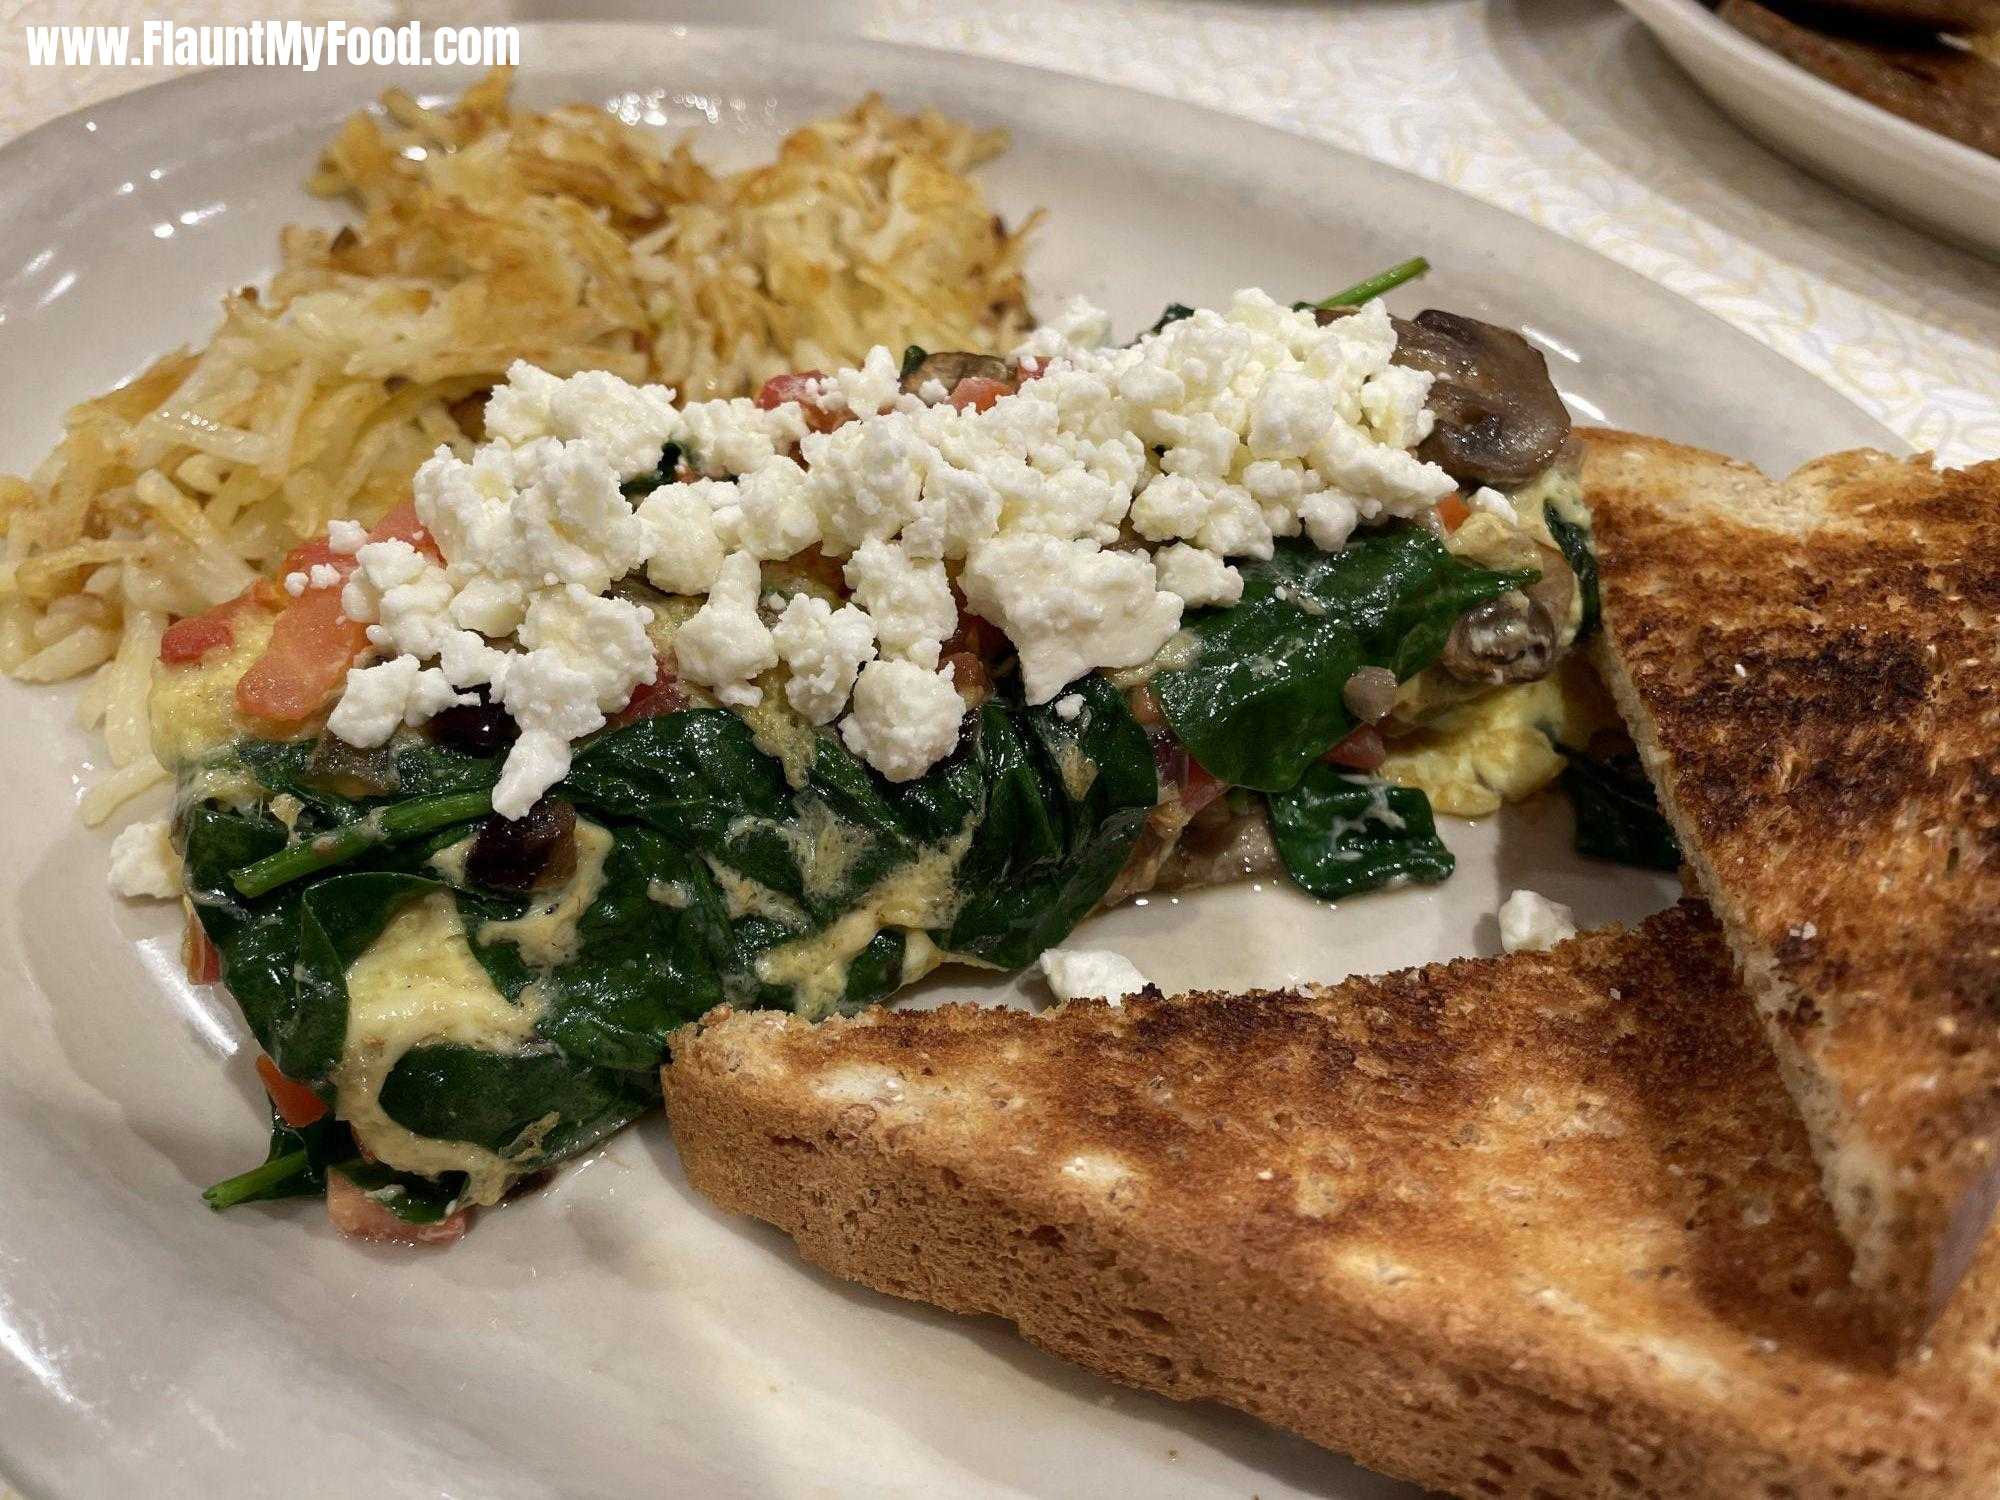 Feta, spinach, mushroom omeletteWheat toast with a feta omelette, including tomatoes, spinach, feta mushrooms, and hashbrowns on the side with coffee at Parris off of Montgomery Street in Fort Worth Texas